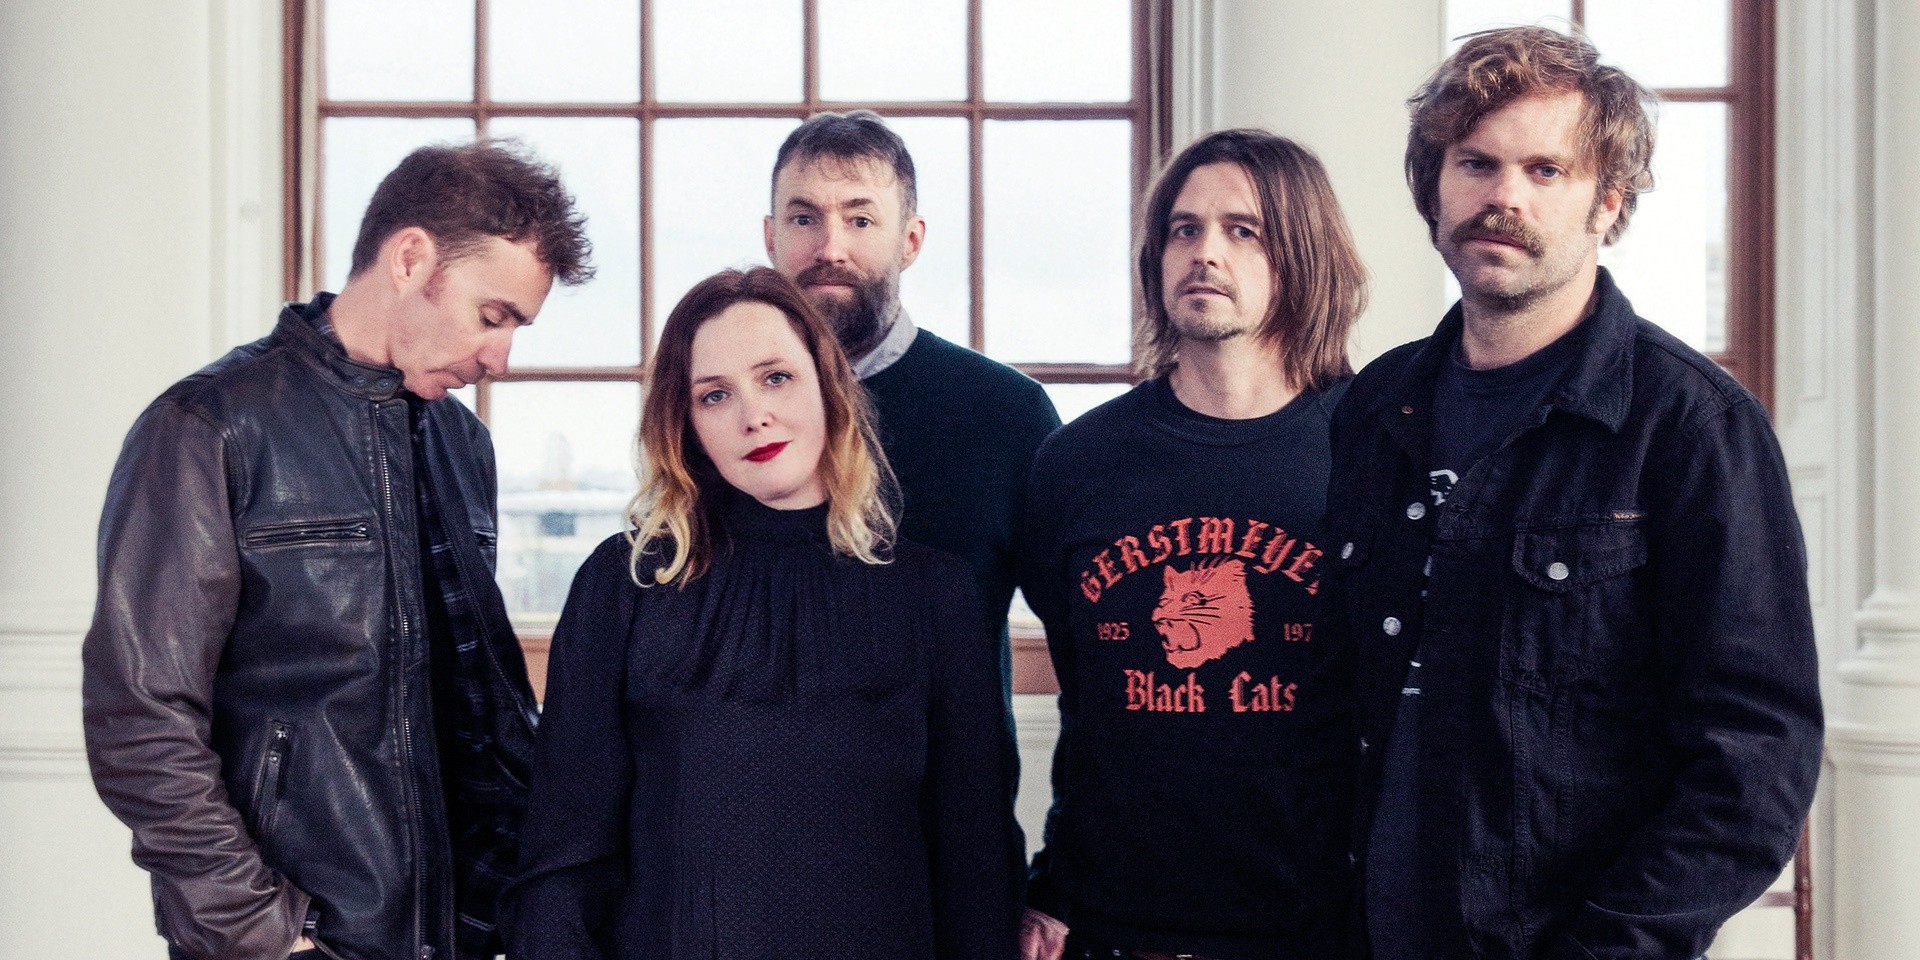 Slowdive's Christian Savill carefully lays out the band's main discography — interview